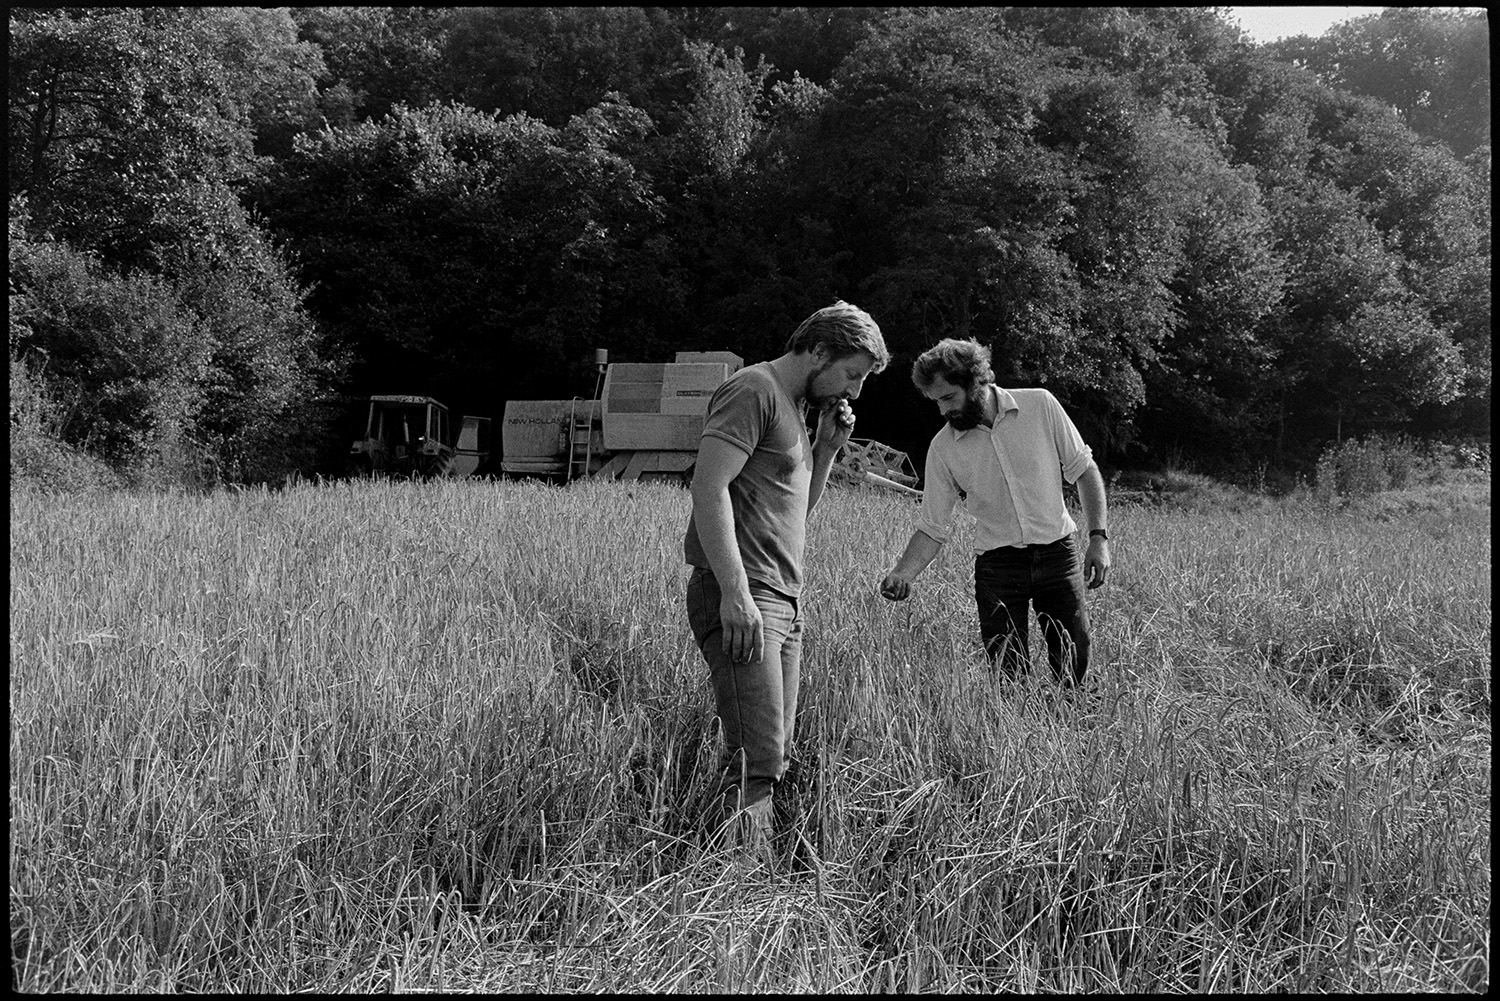 Farmers setting up combine harvester and checking crop of barley.
[Two men standing in a field of barley, checking it for readiness to harvest at South Harepath, Beaford. A tractor and combine harvester is visible in the background.]